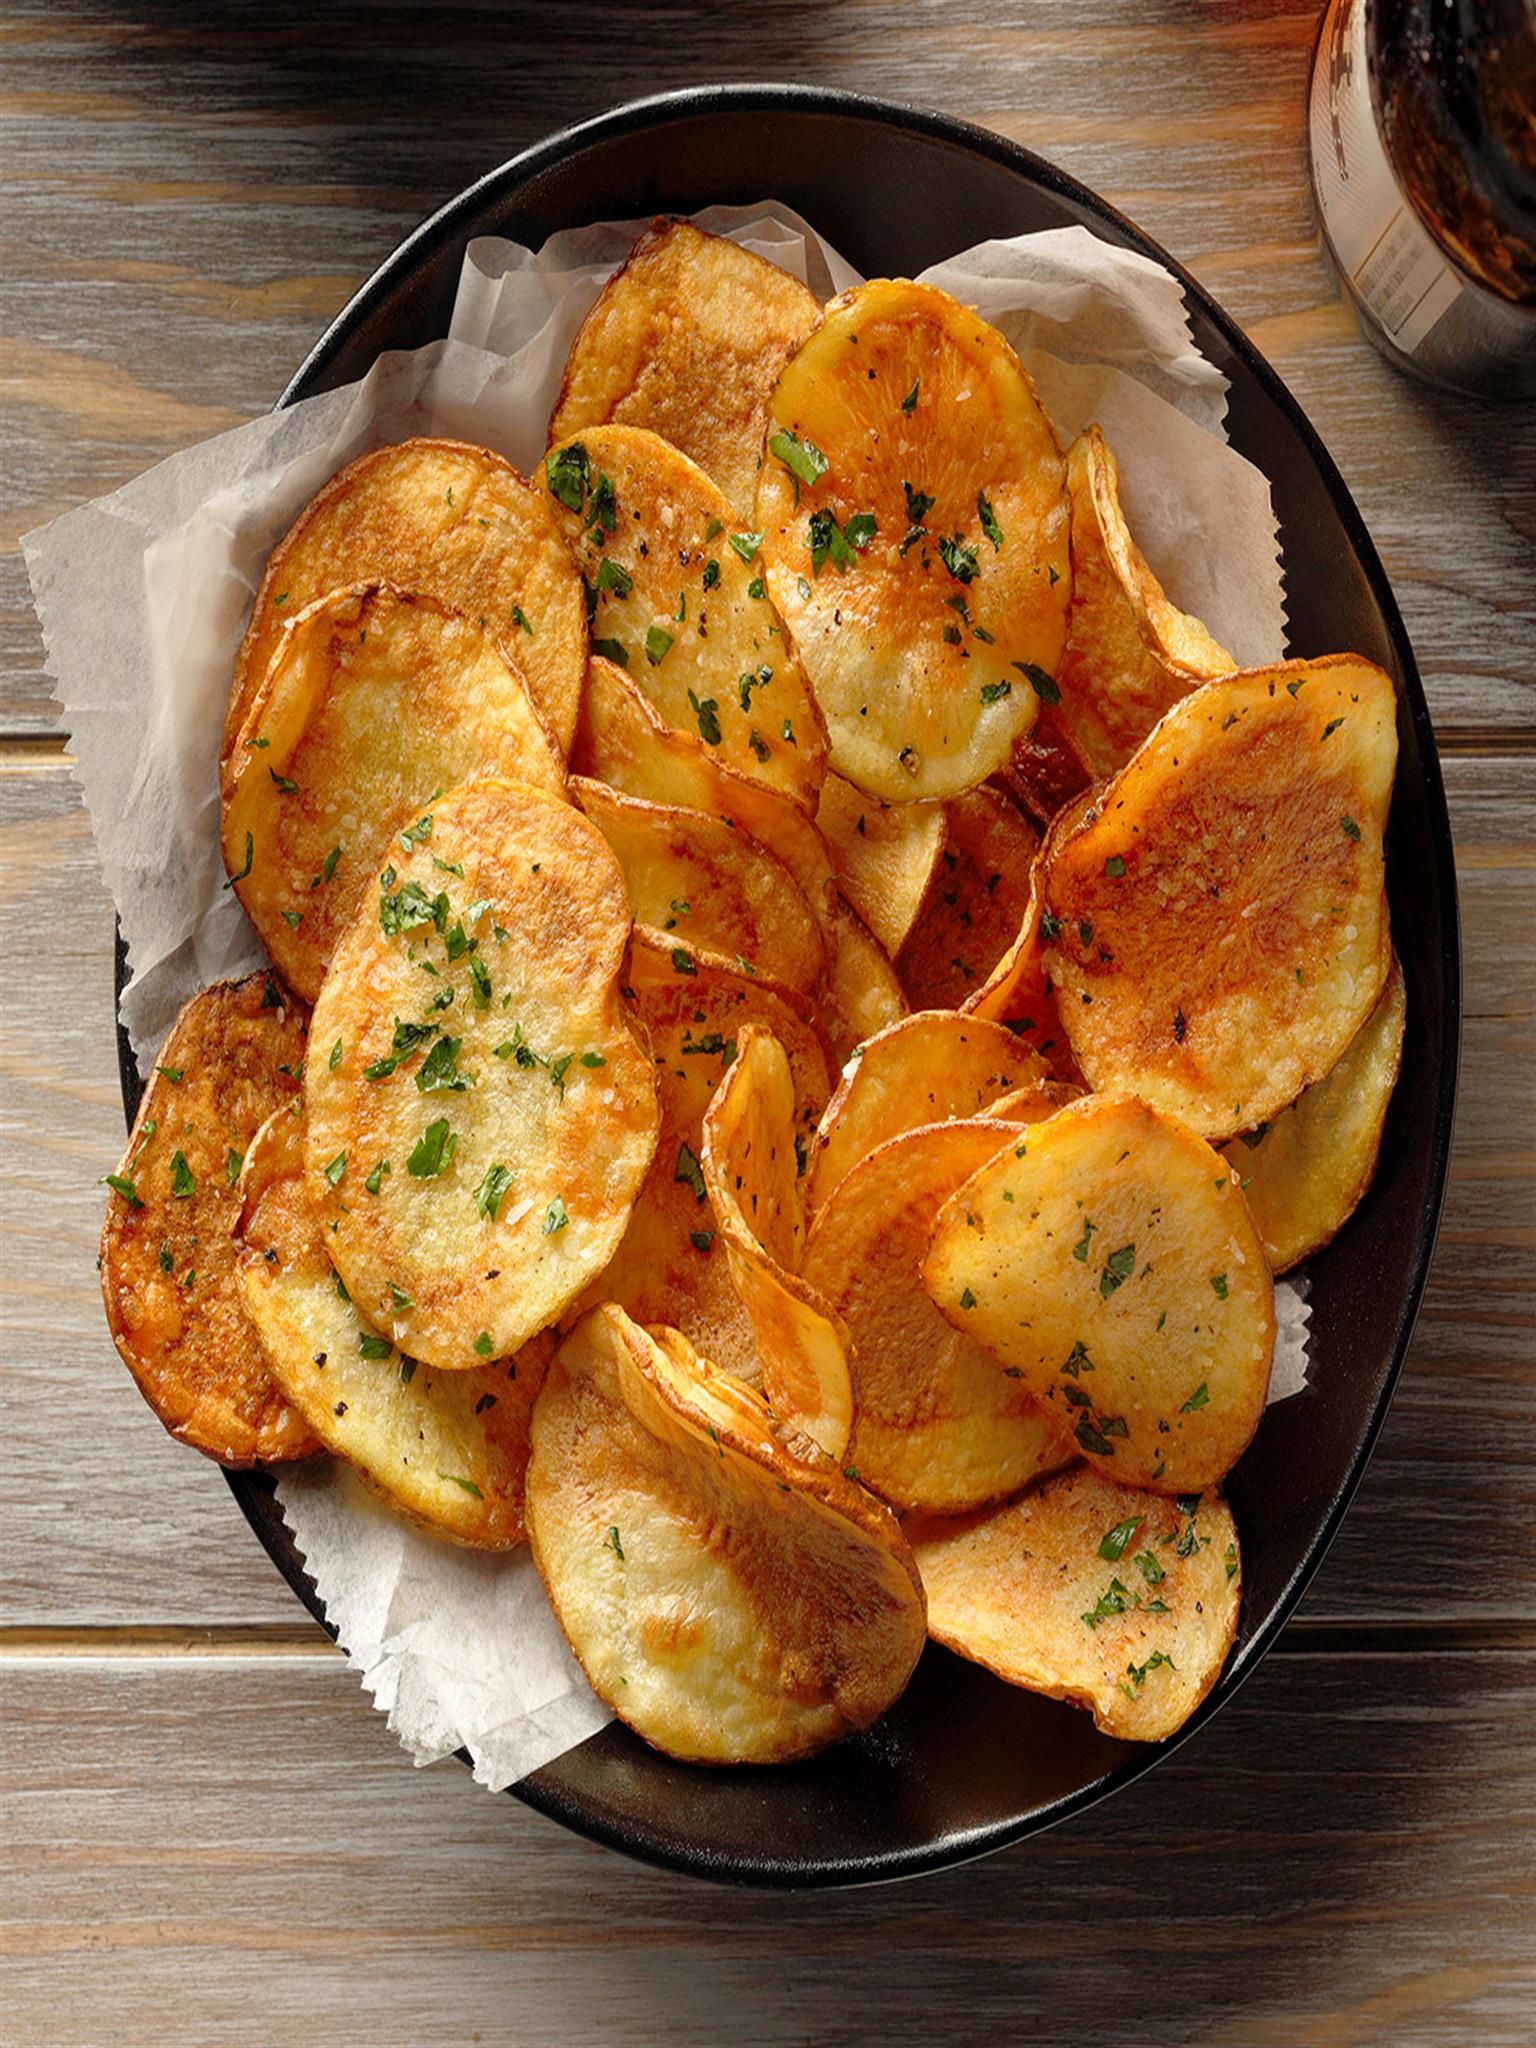 Potato Chips Recipe: How to